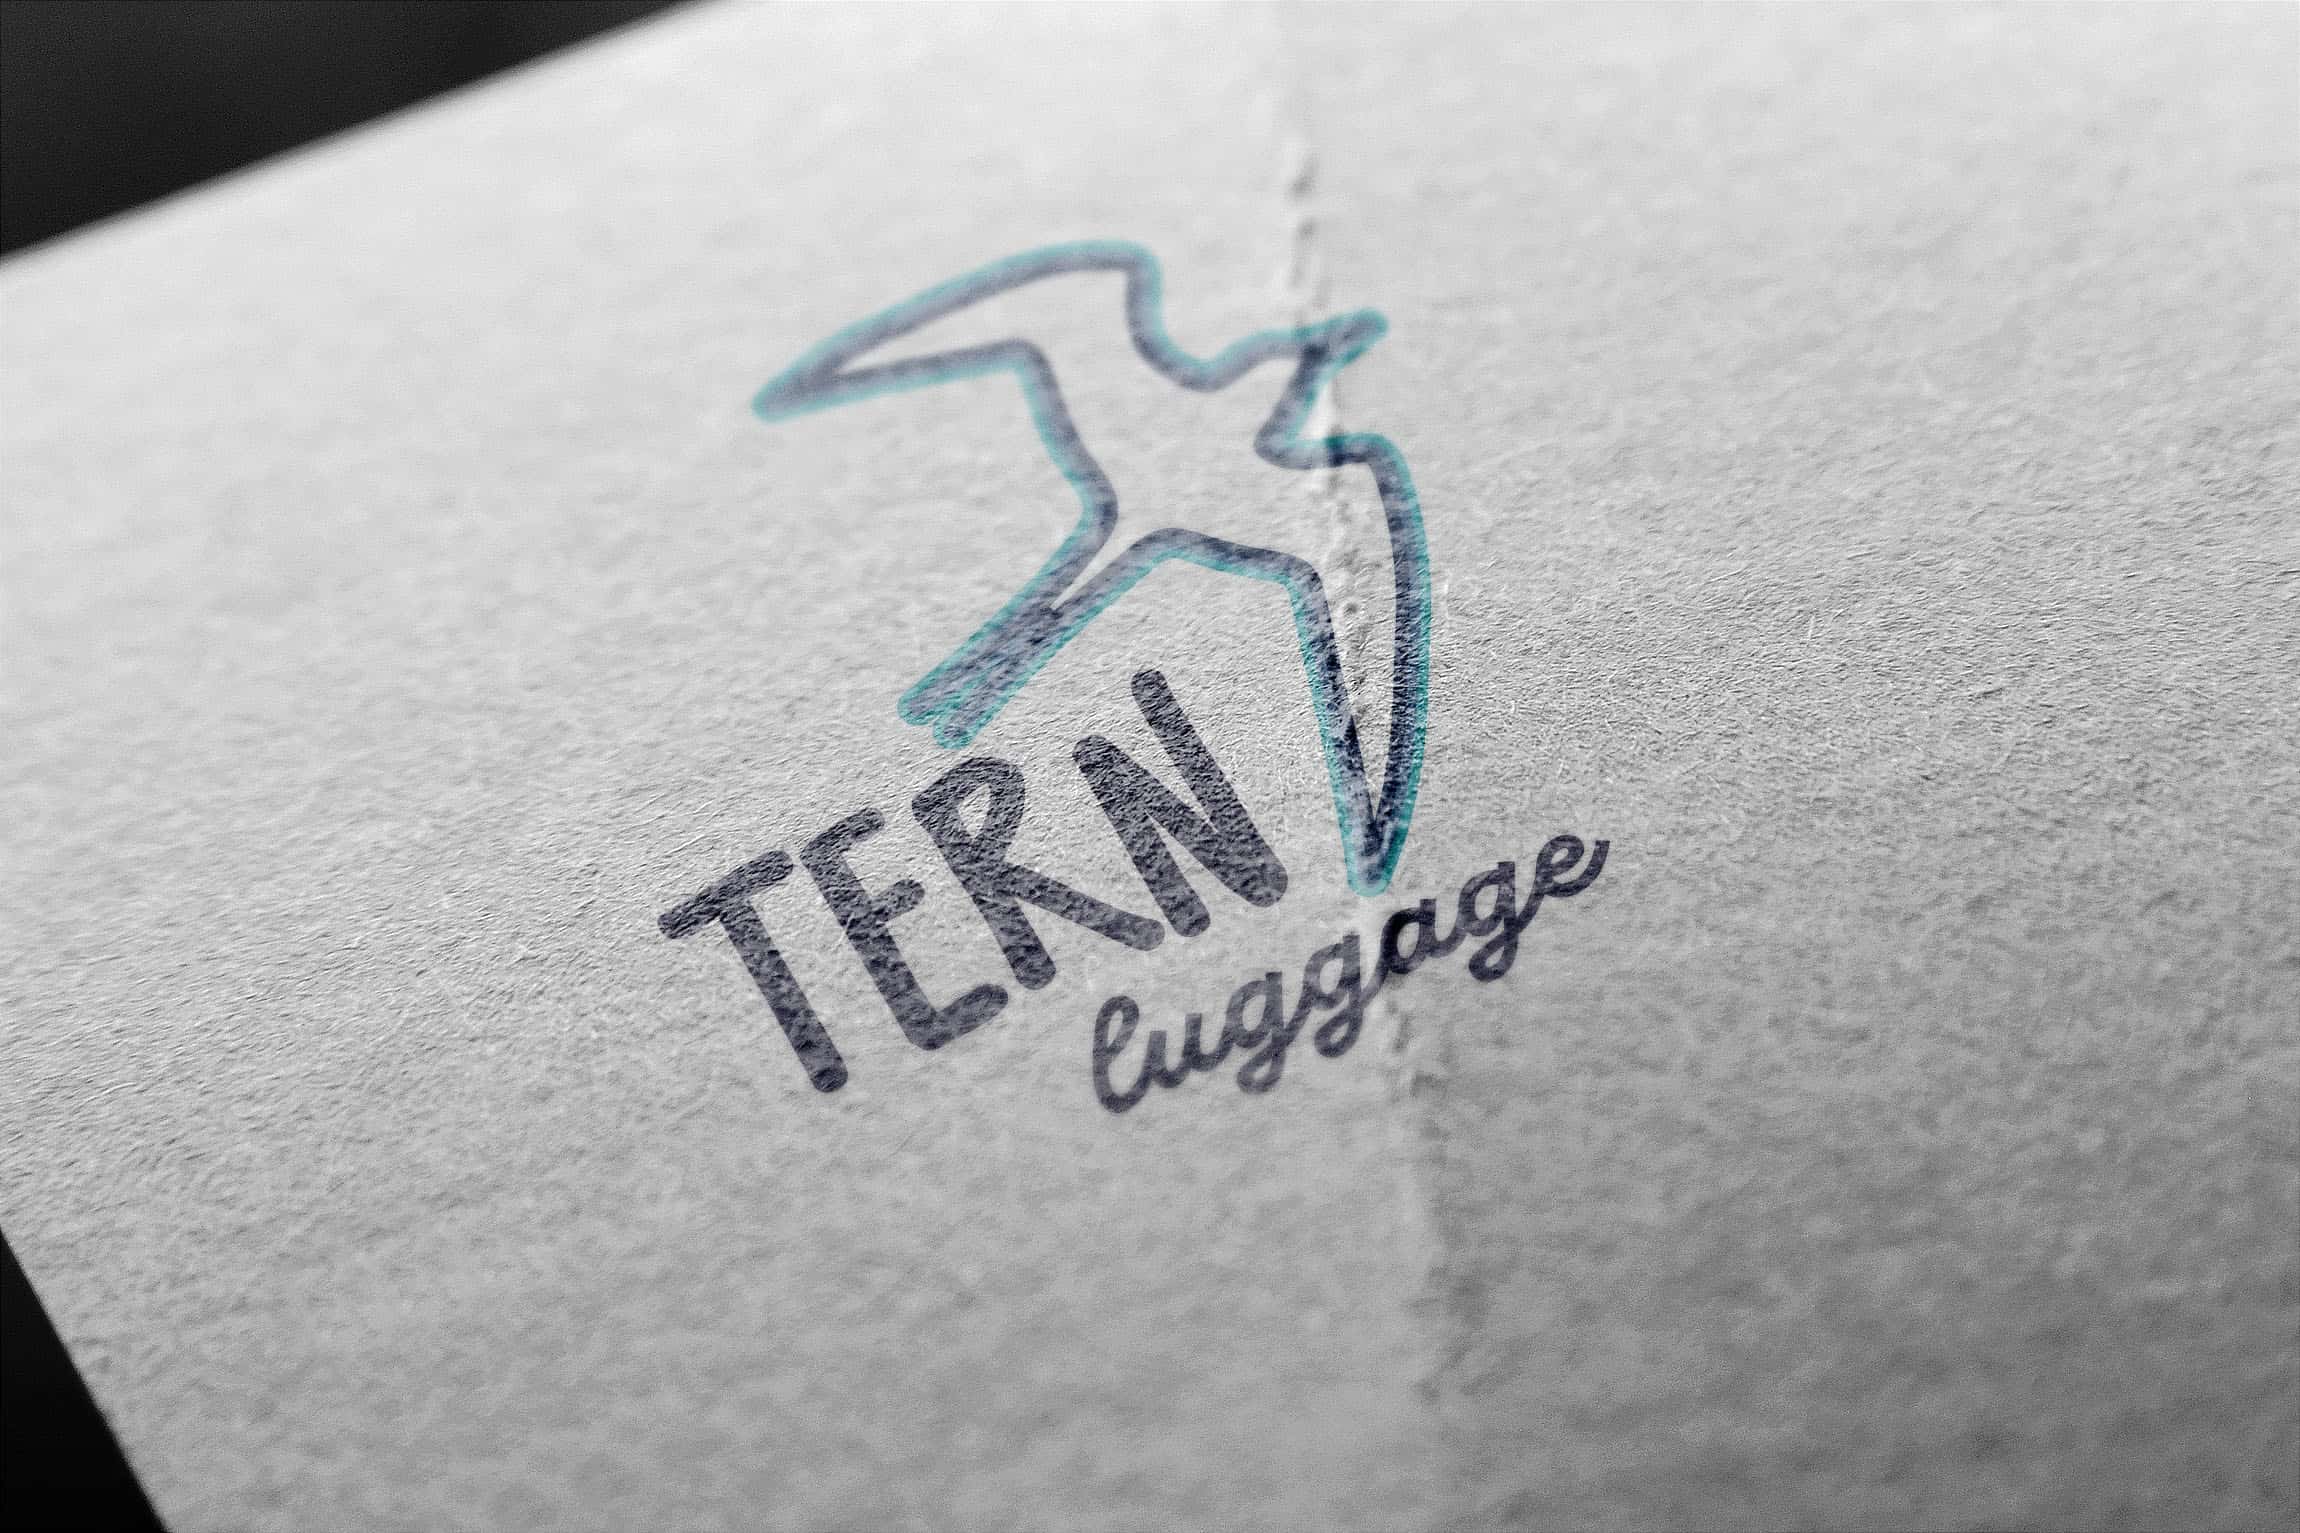 tern printed logo on paper with surface texture